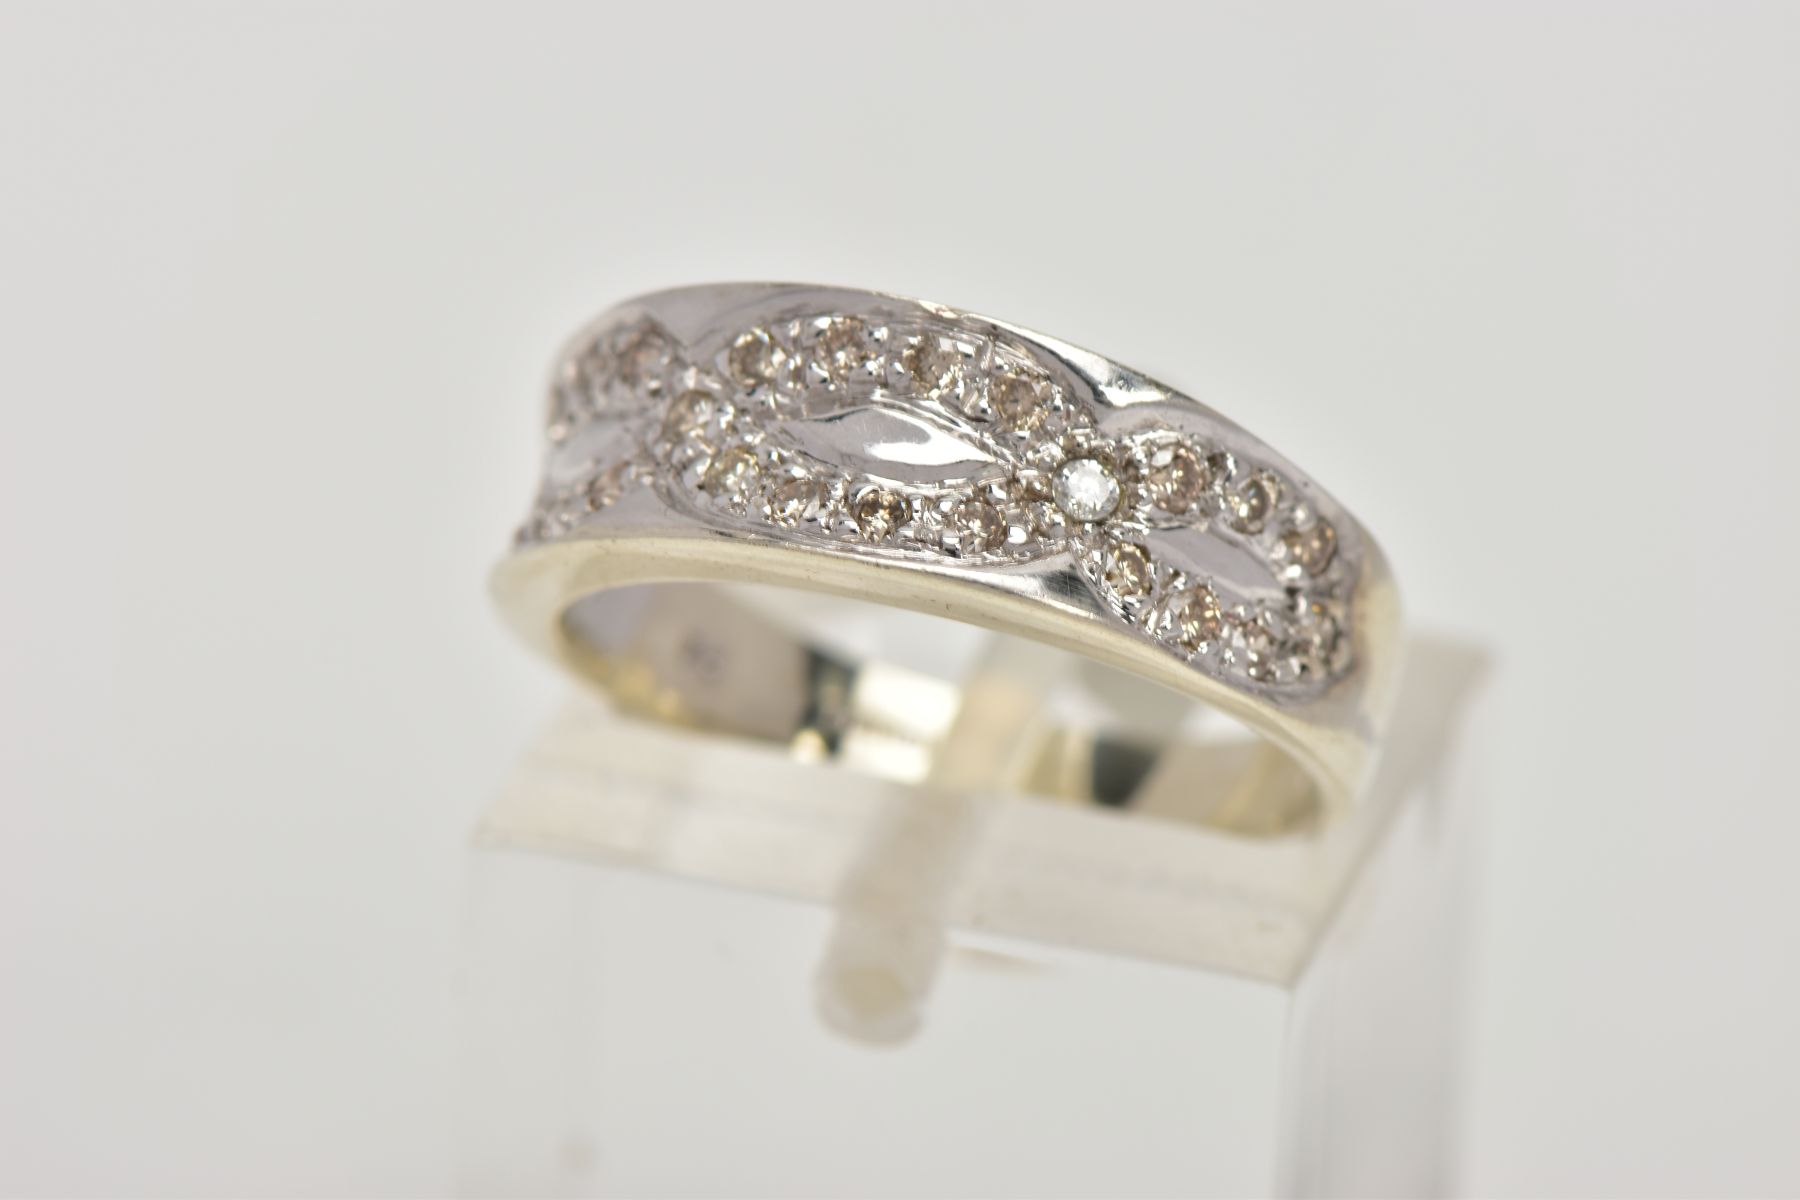 A 9CT WHITE GOLD DIAMOND DRESS RING, the tapered, slightly concave band set to the front half with